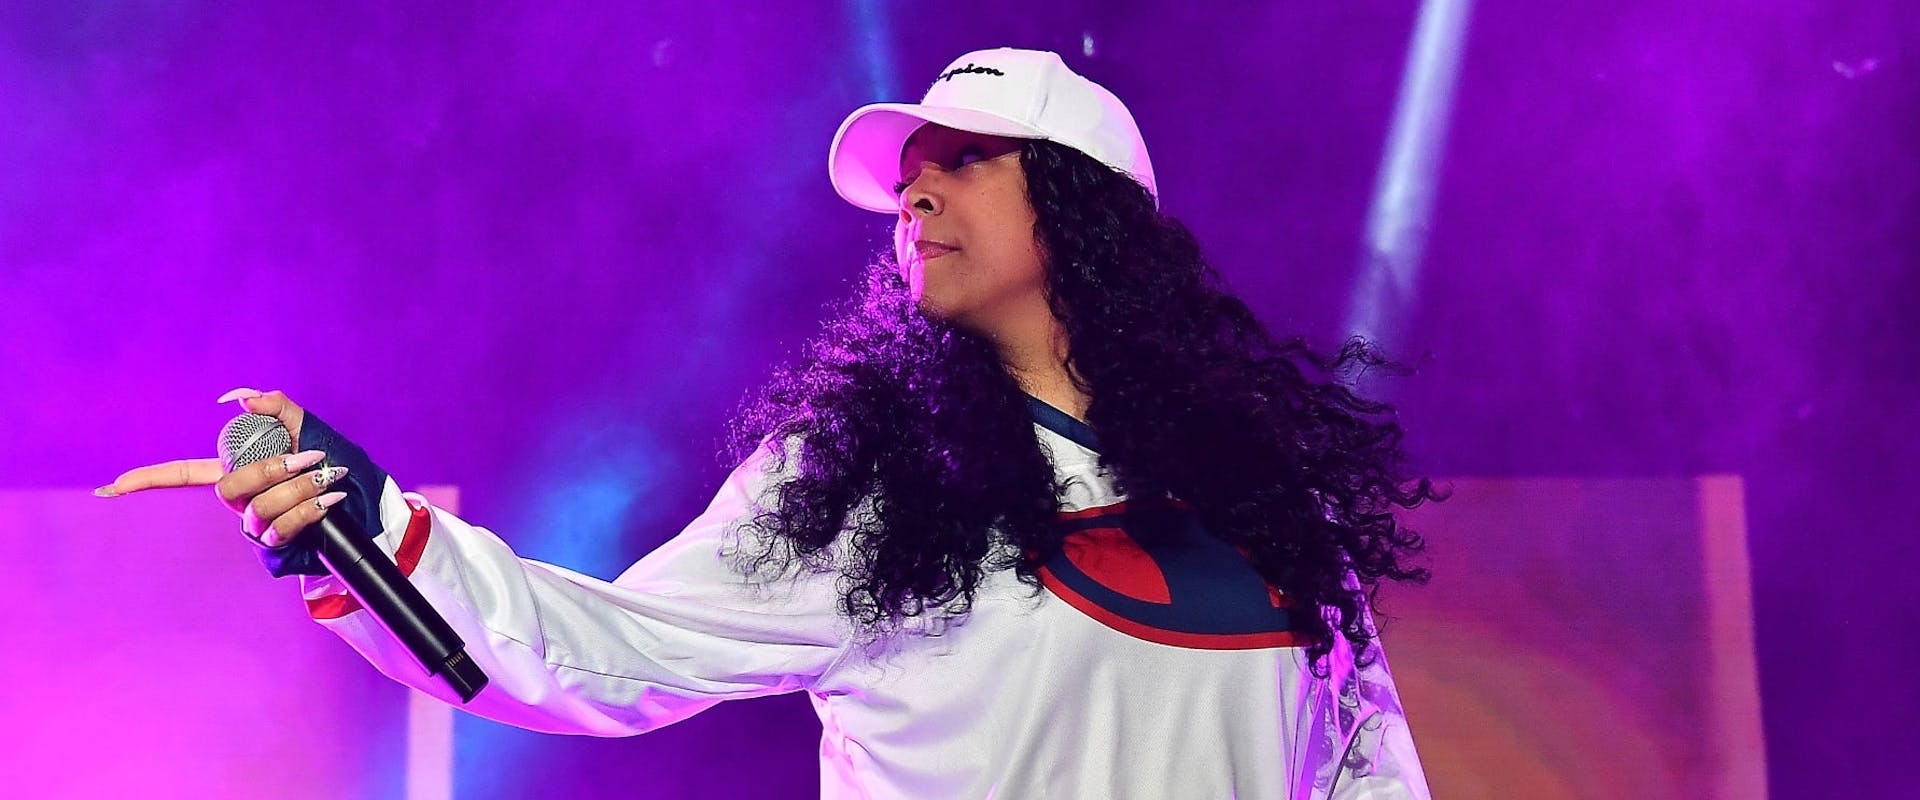 Rapper Monie Love perform onstage during Queen Latifah's "Ladies First" night at the 2018 Essence Festival - Night 2 at Louisiana Superdome on July 7, 2018 in New Orleans, Louisiana.